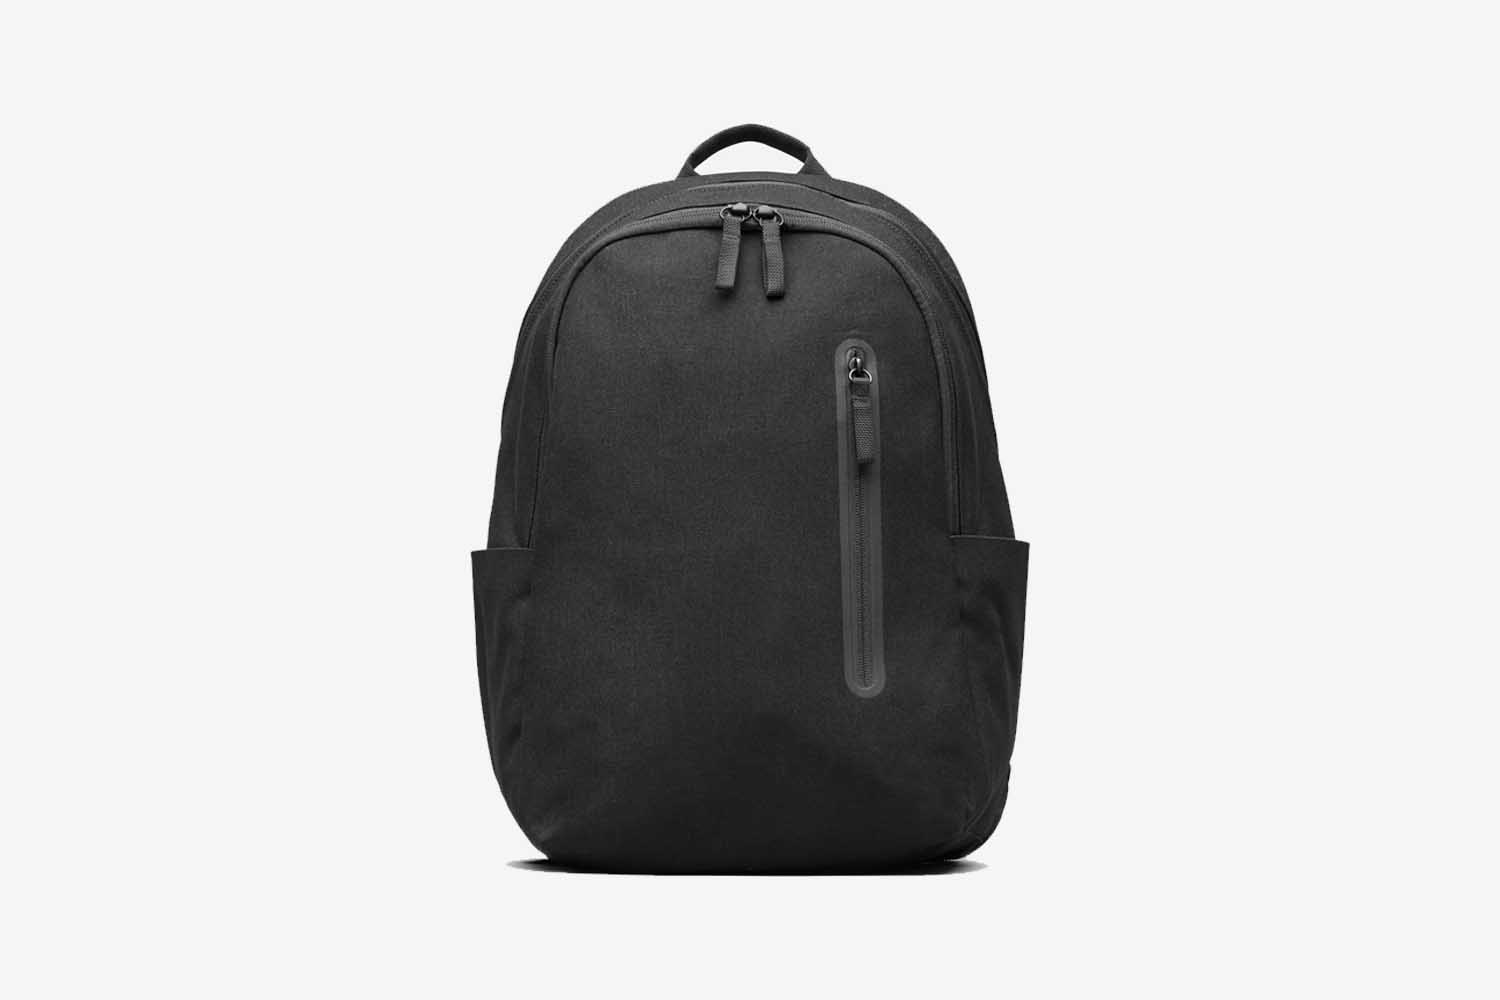 Deal: Everlane’s Sophisticated Commuter Backpack Is 50% Off